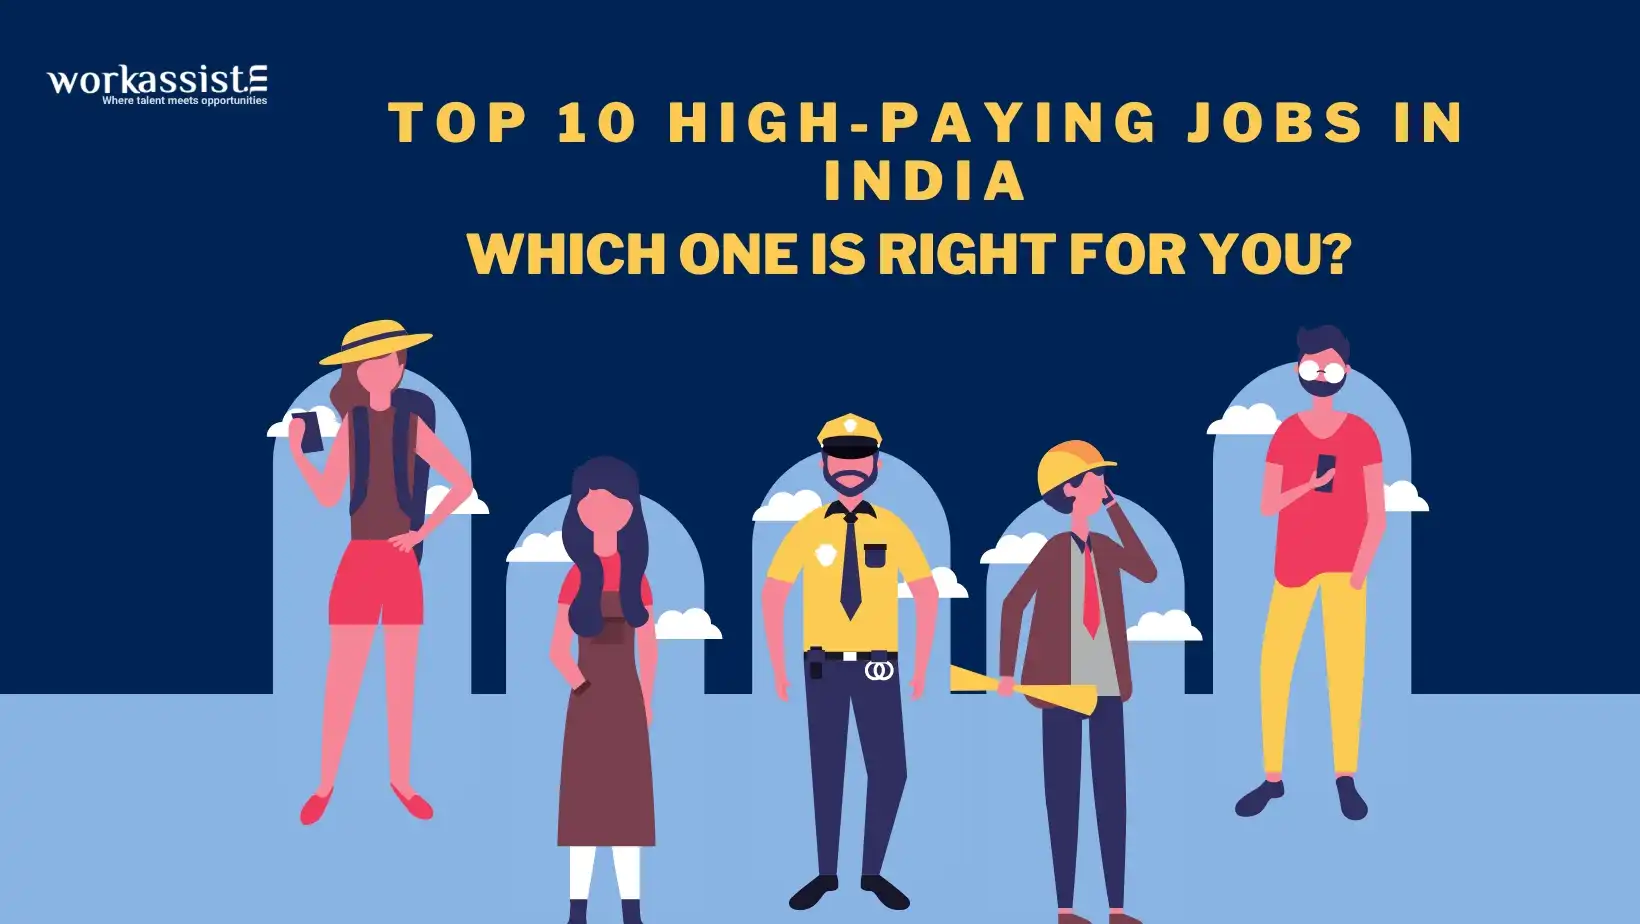 Top 10 High-Paying Jobs in India: Which One is Right for You?